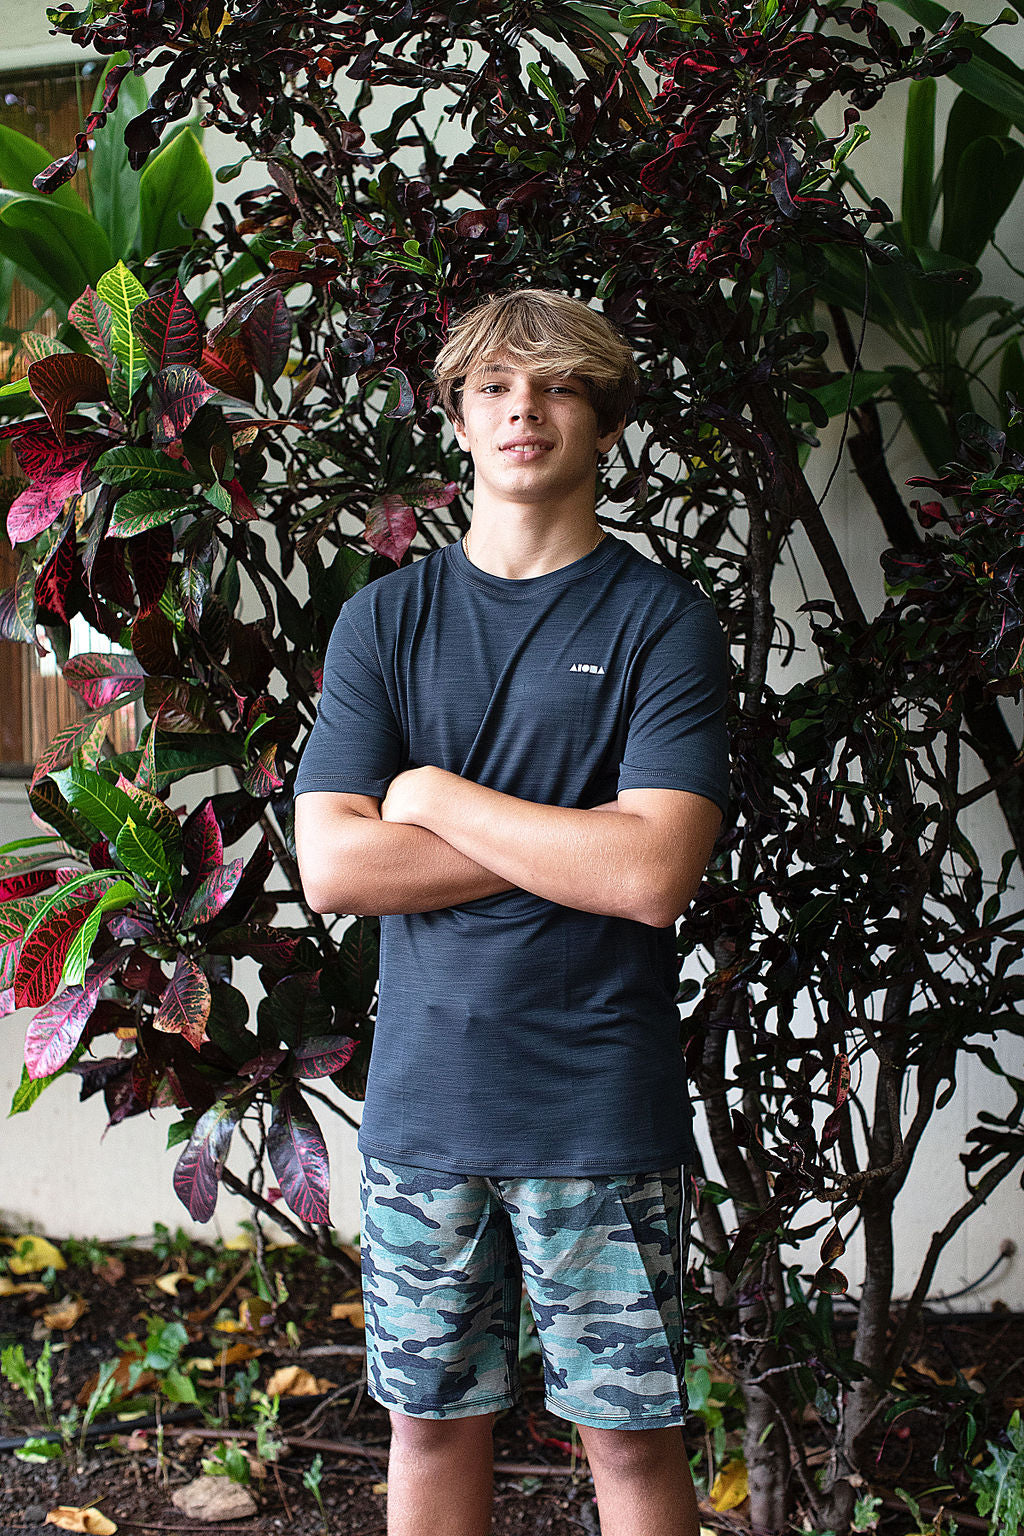 Surfer boy wearing camo print unisex board shorts in front of tropical foliage in Hawaii